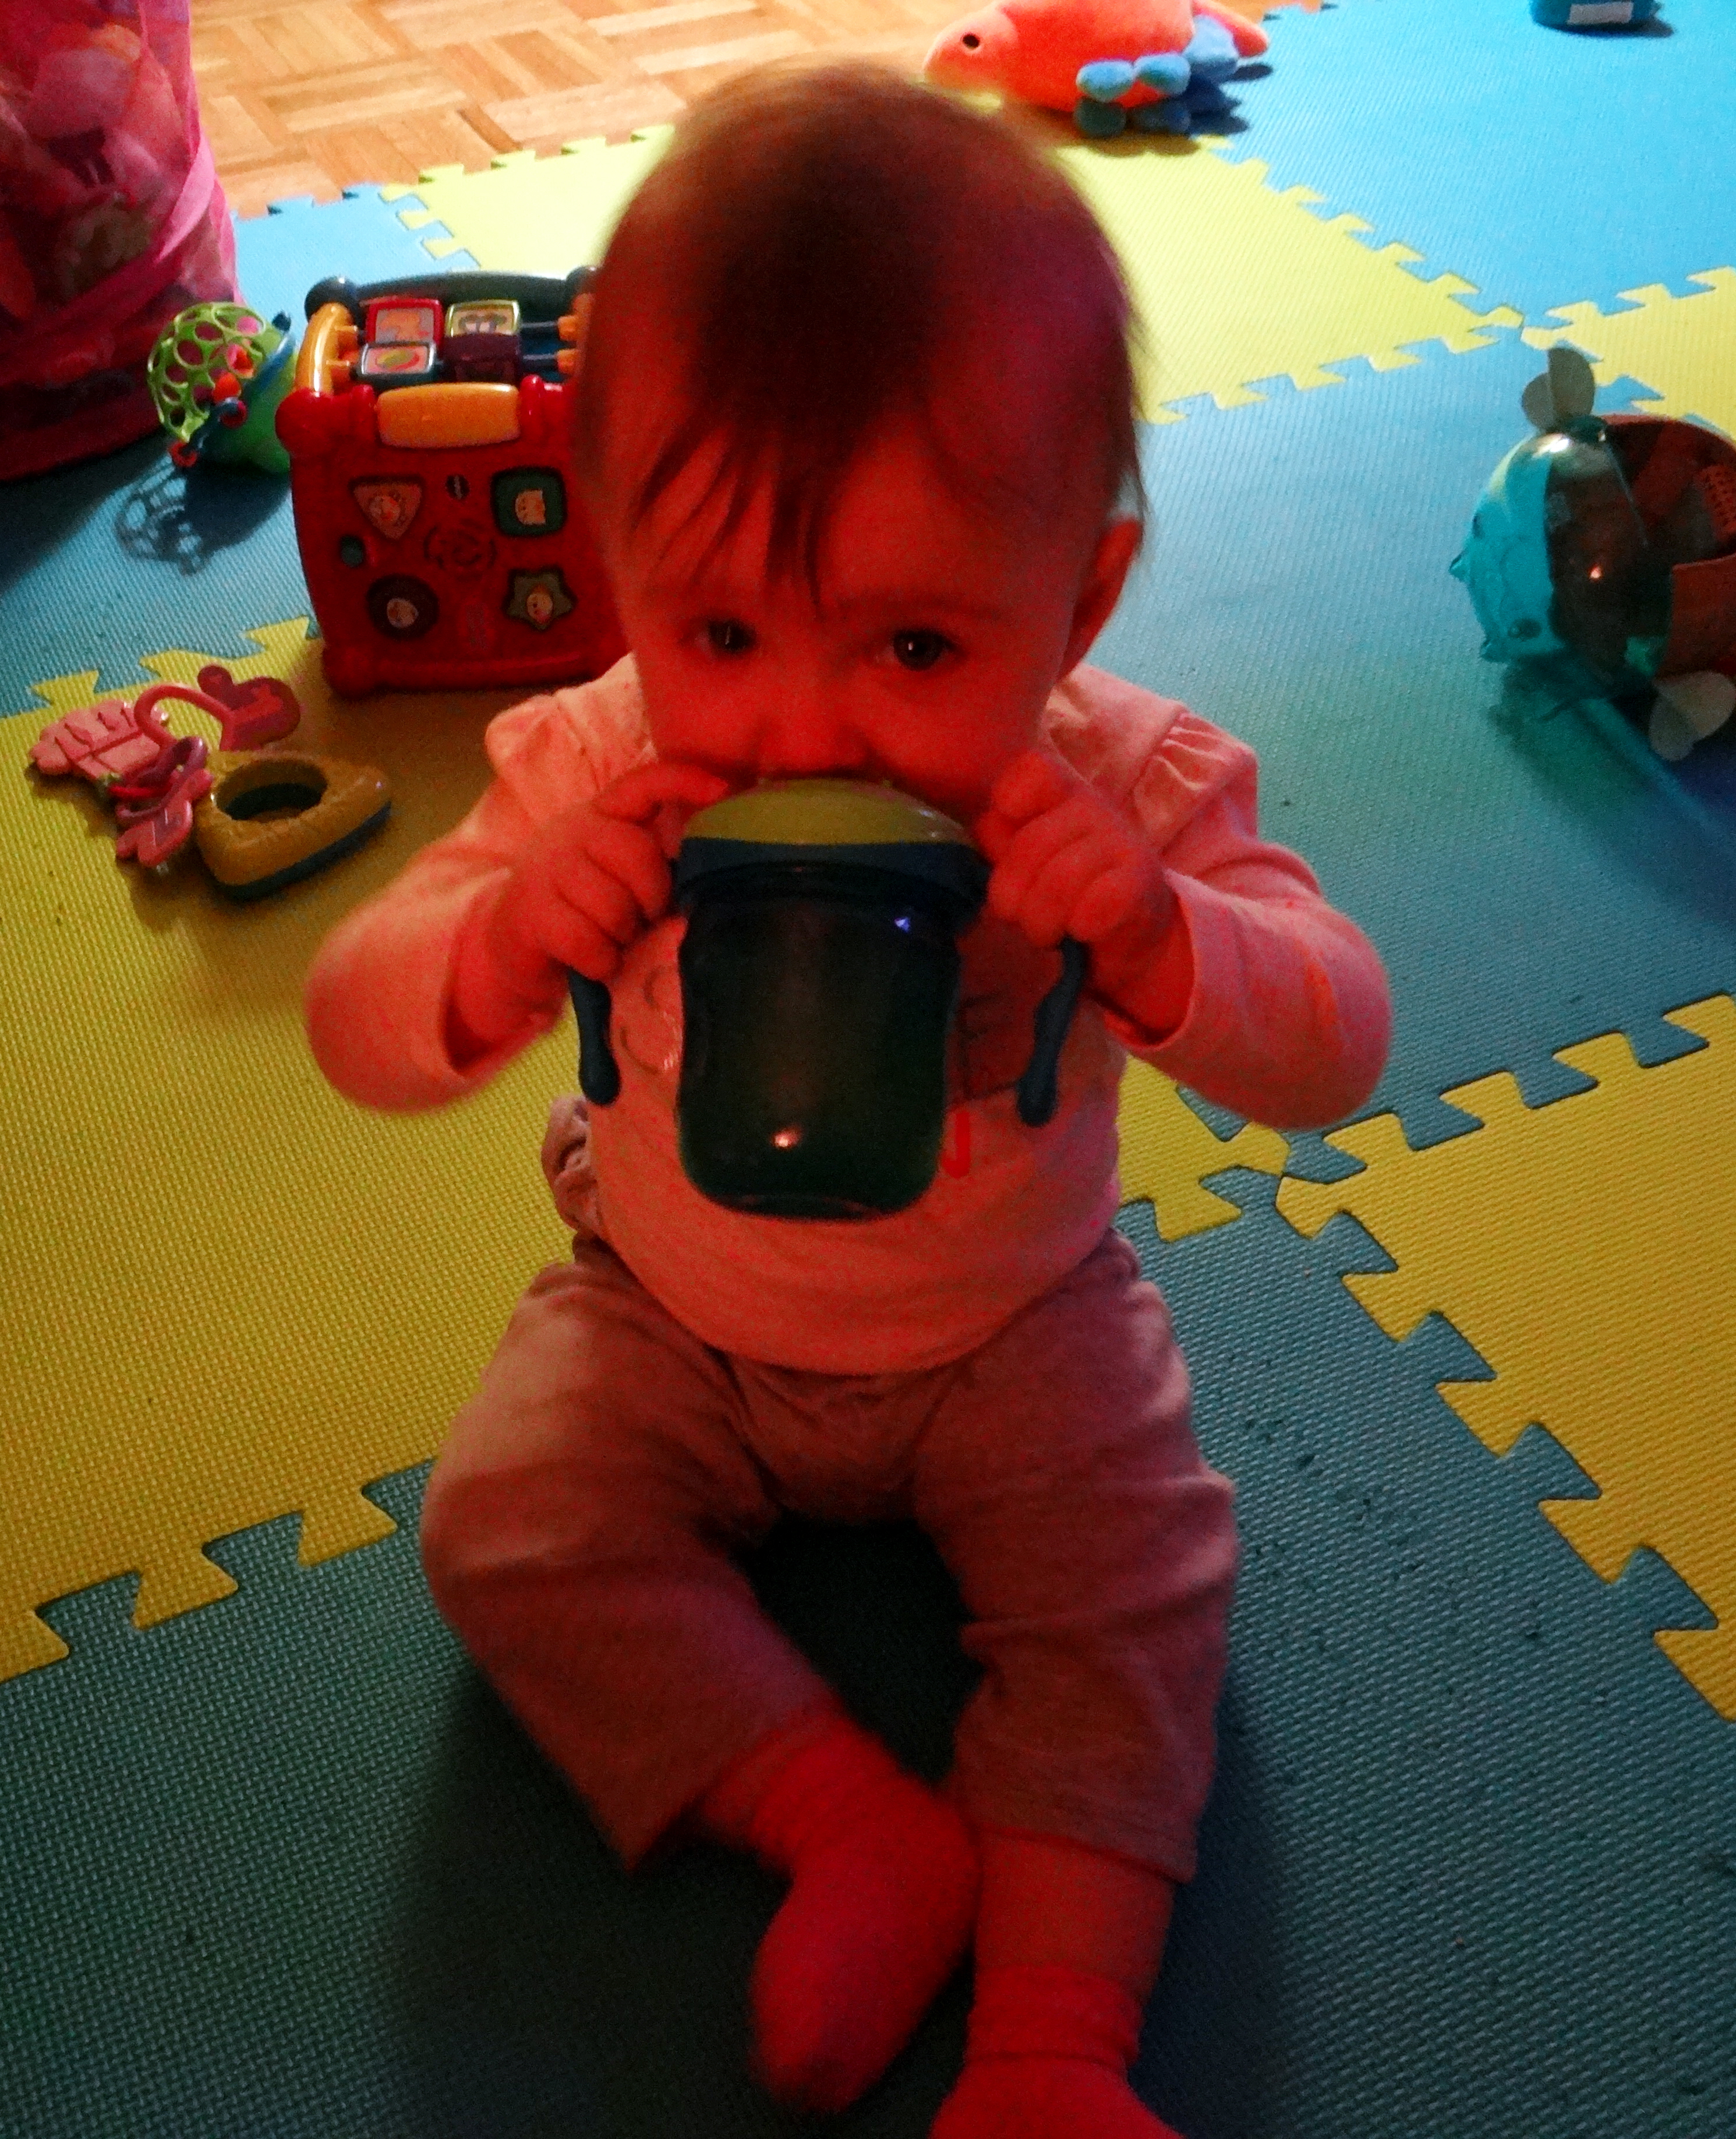 Baby drinking from a sippy cup